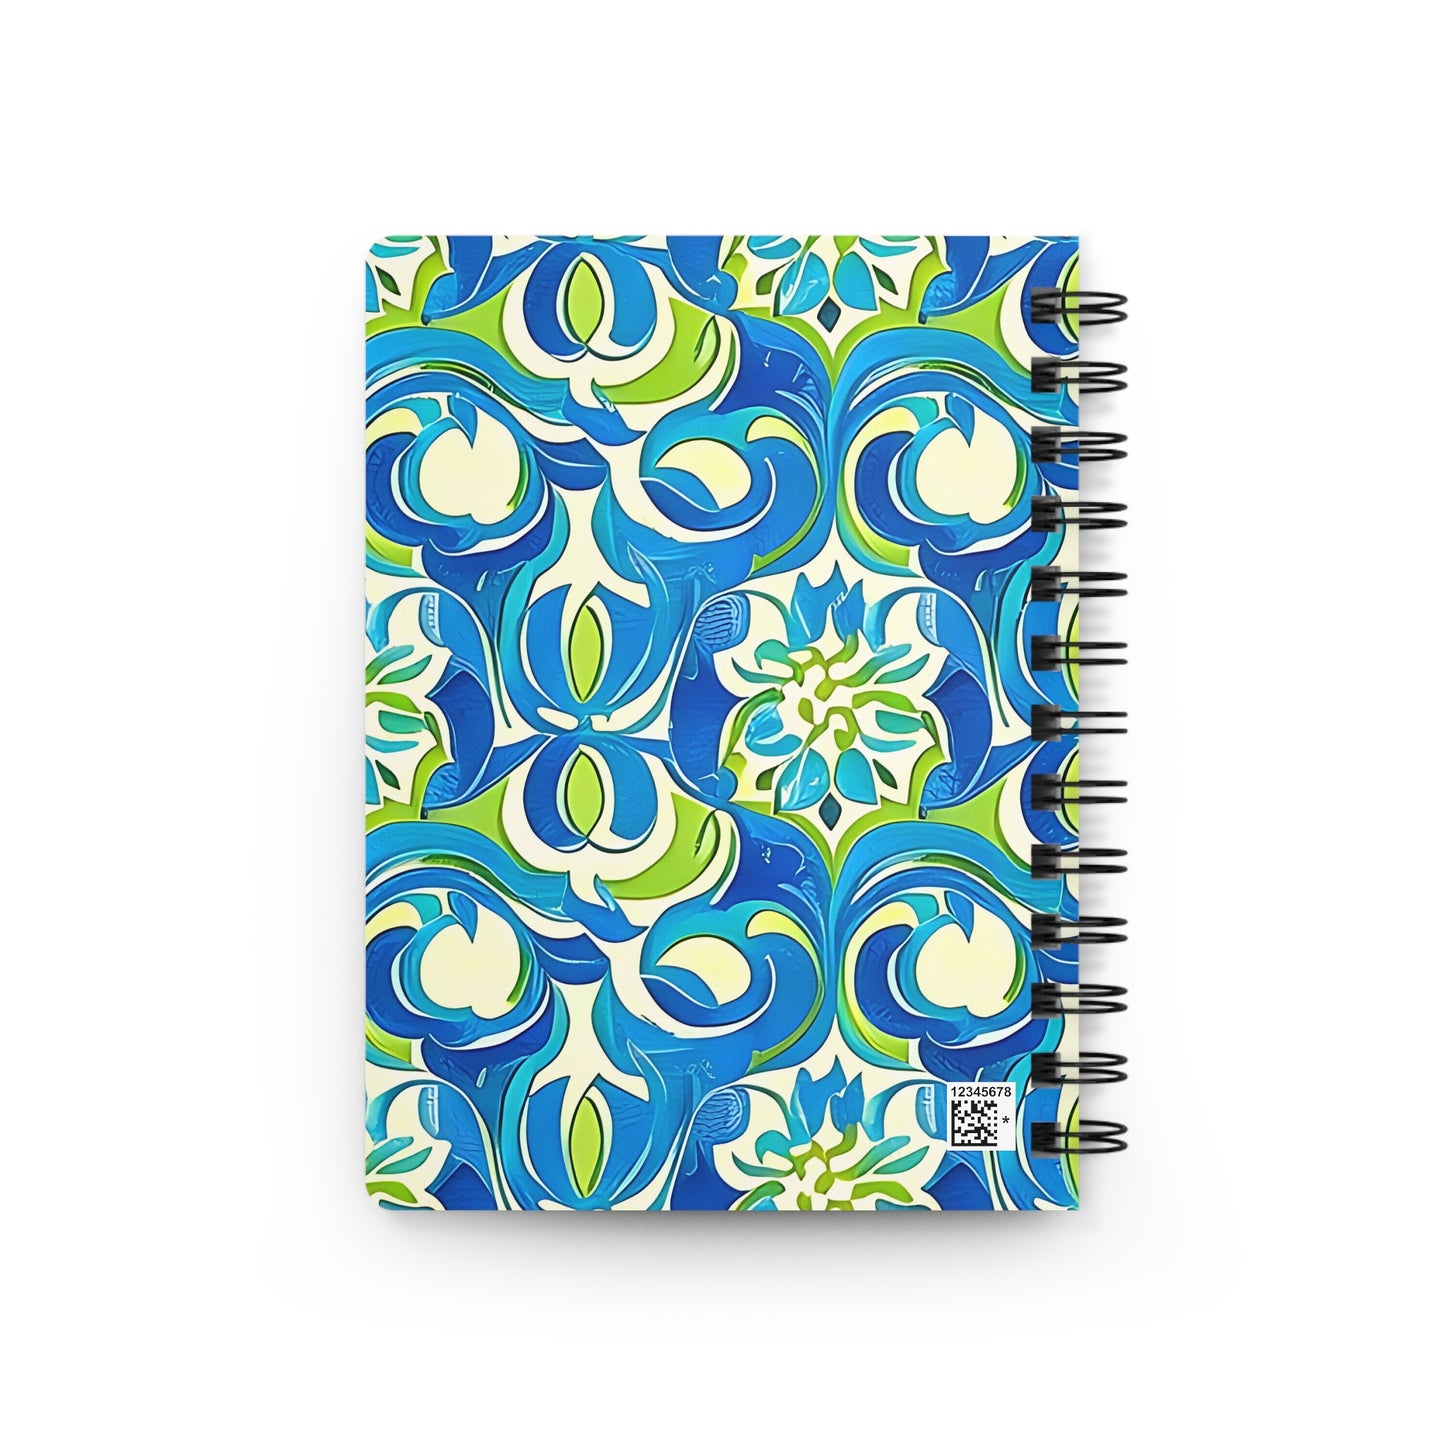 Naples Osteria Sea Blue Italian Tile Pattern Decorative Foodie Travel  Writing Spiral Bound Journal